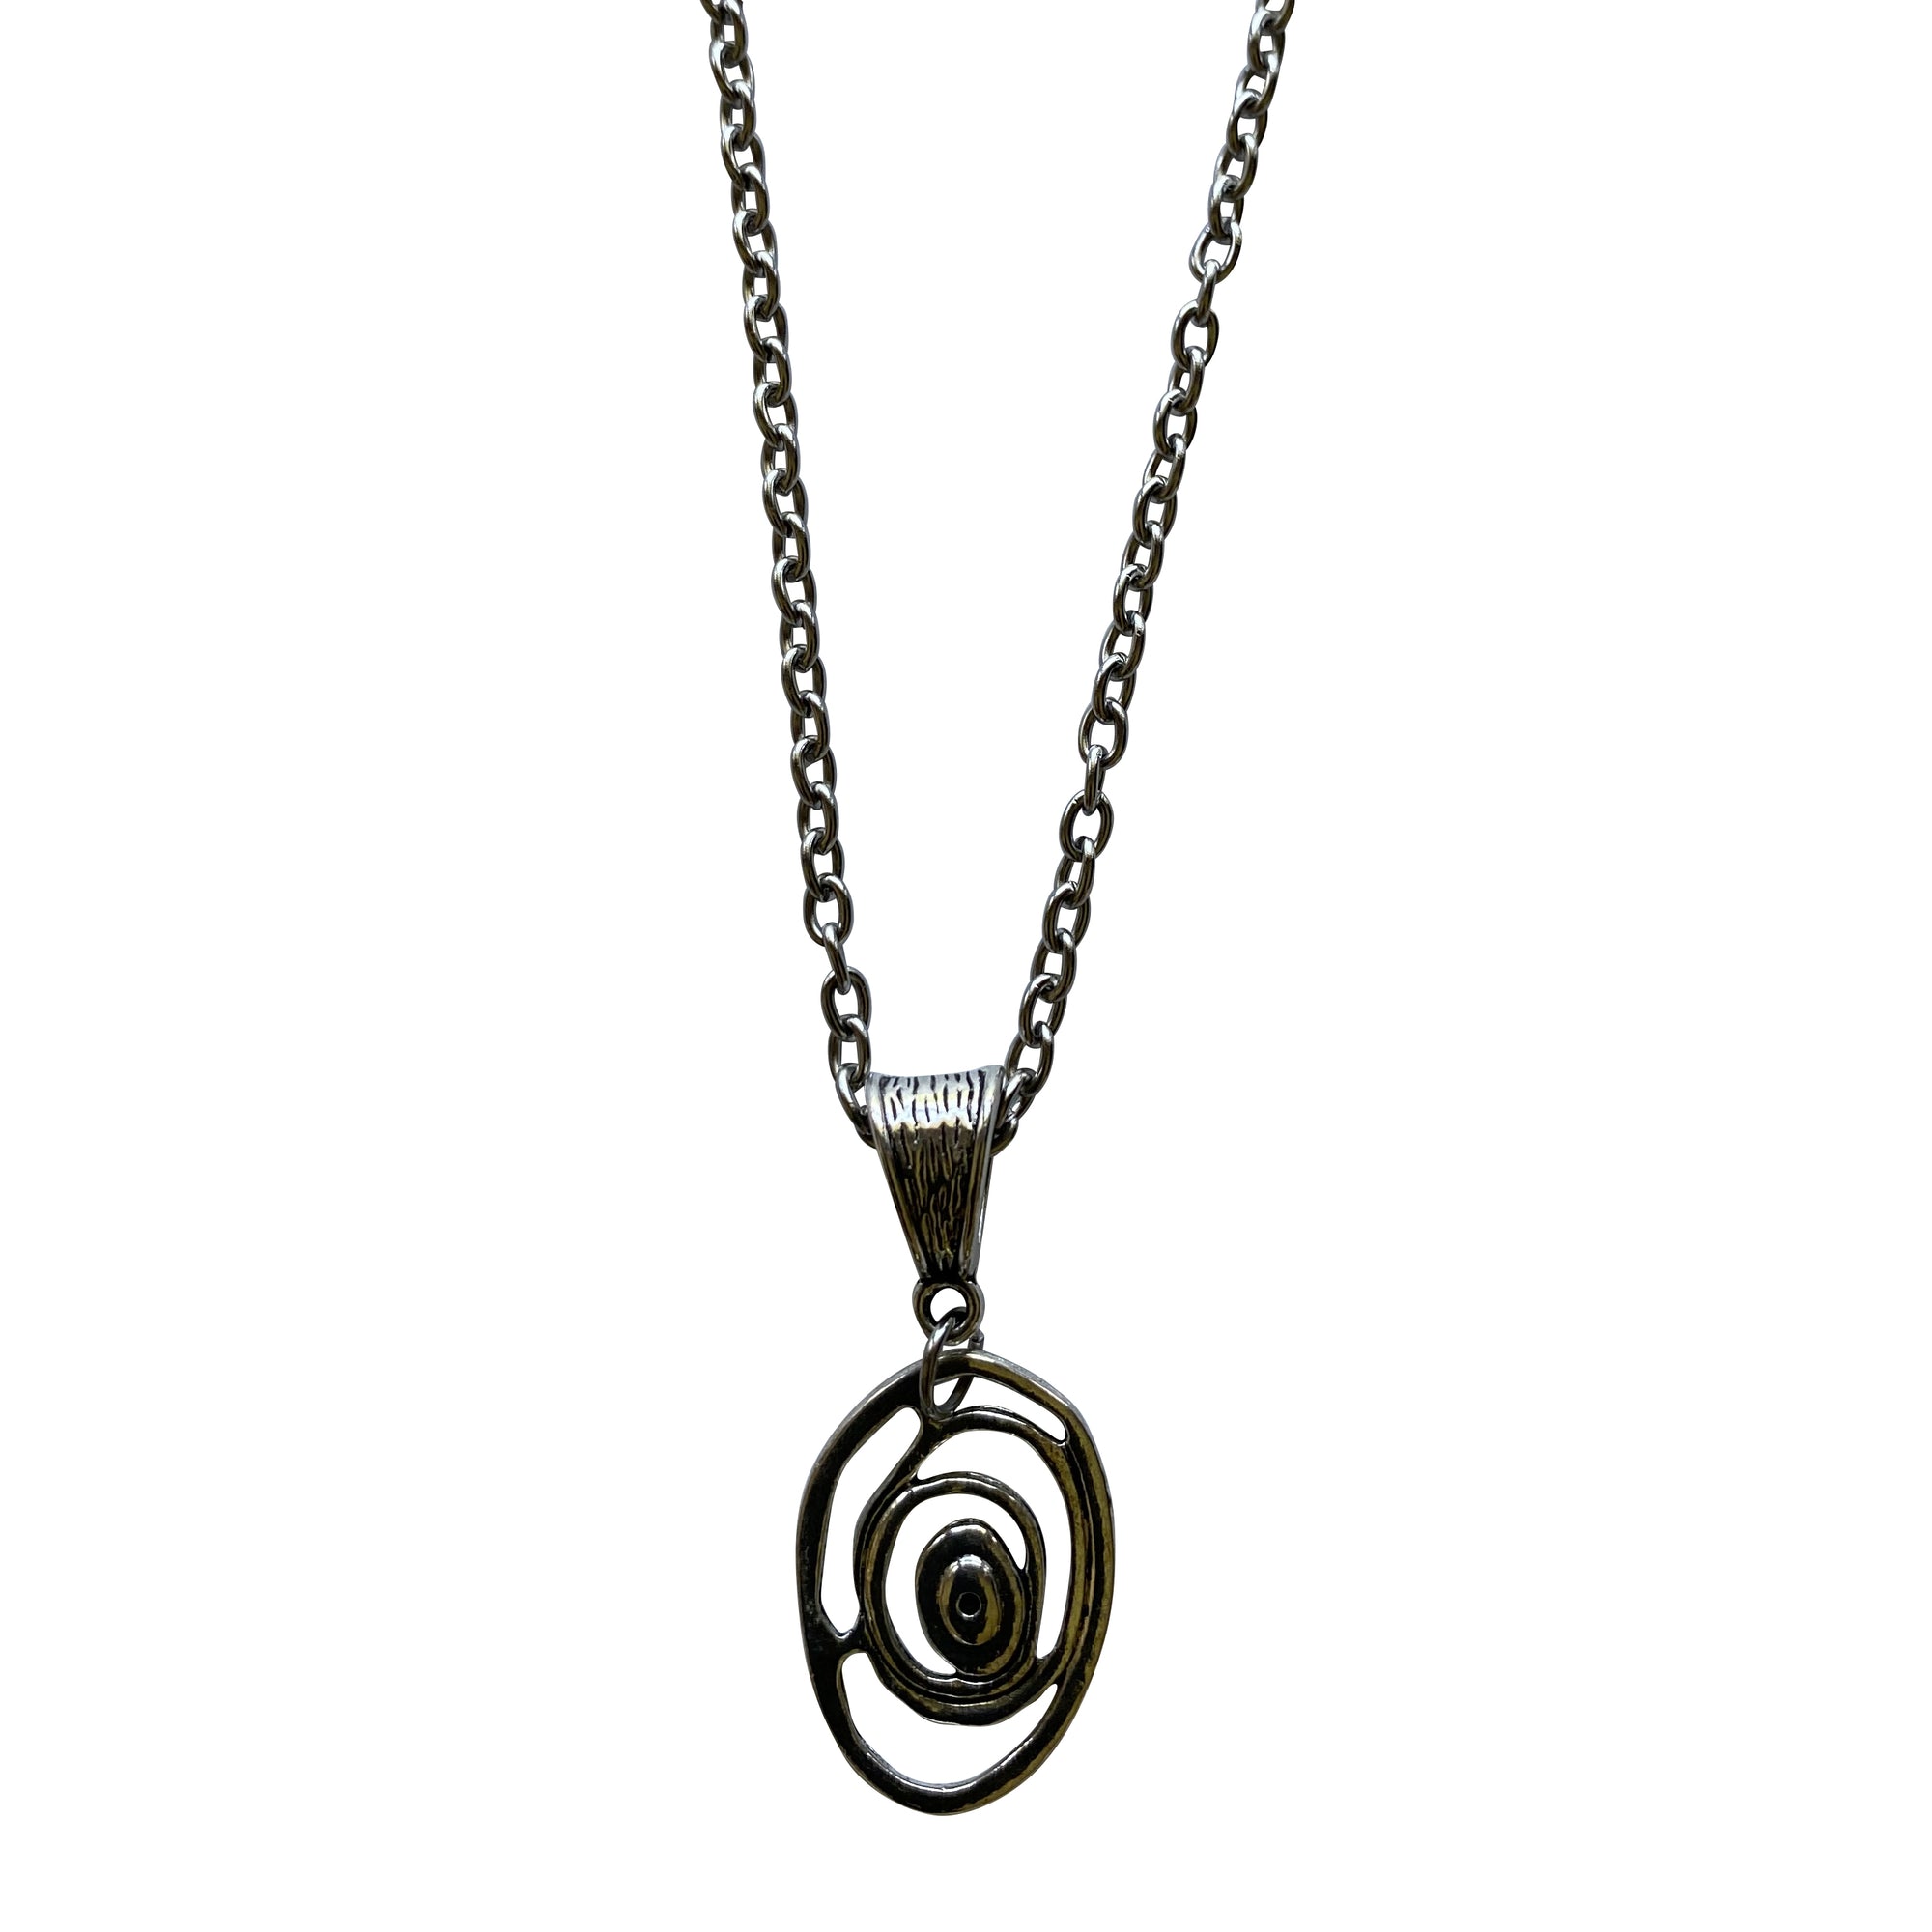 Silver Chain Necklace with Pewter Infinity Pendant